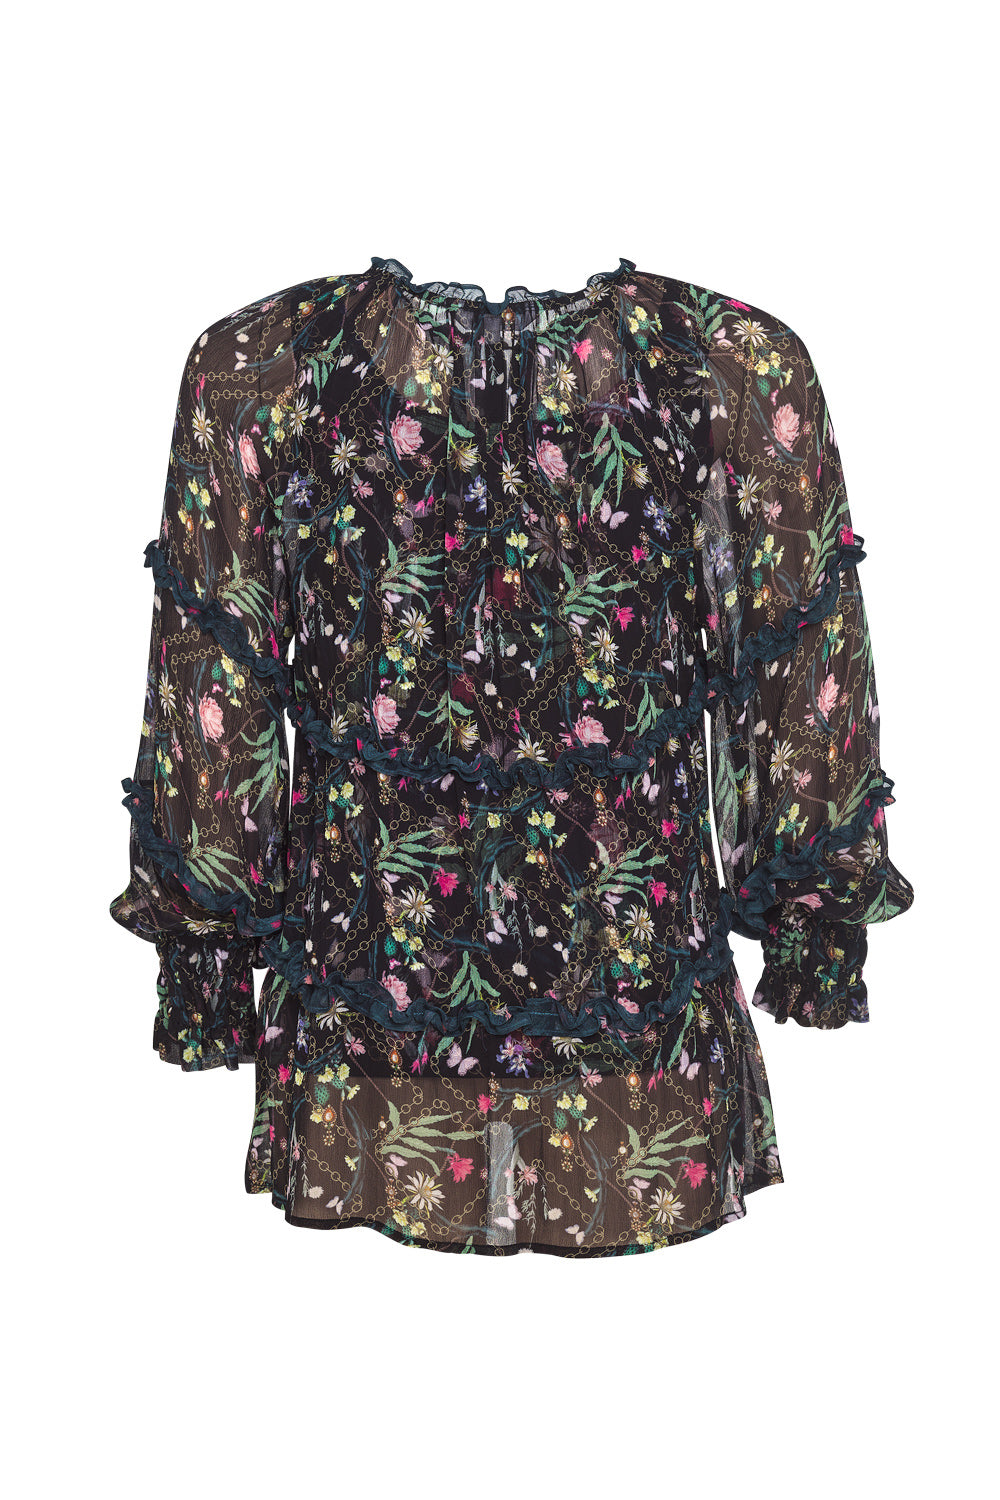 Loobies Story Paramour Blouse Black